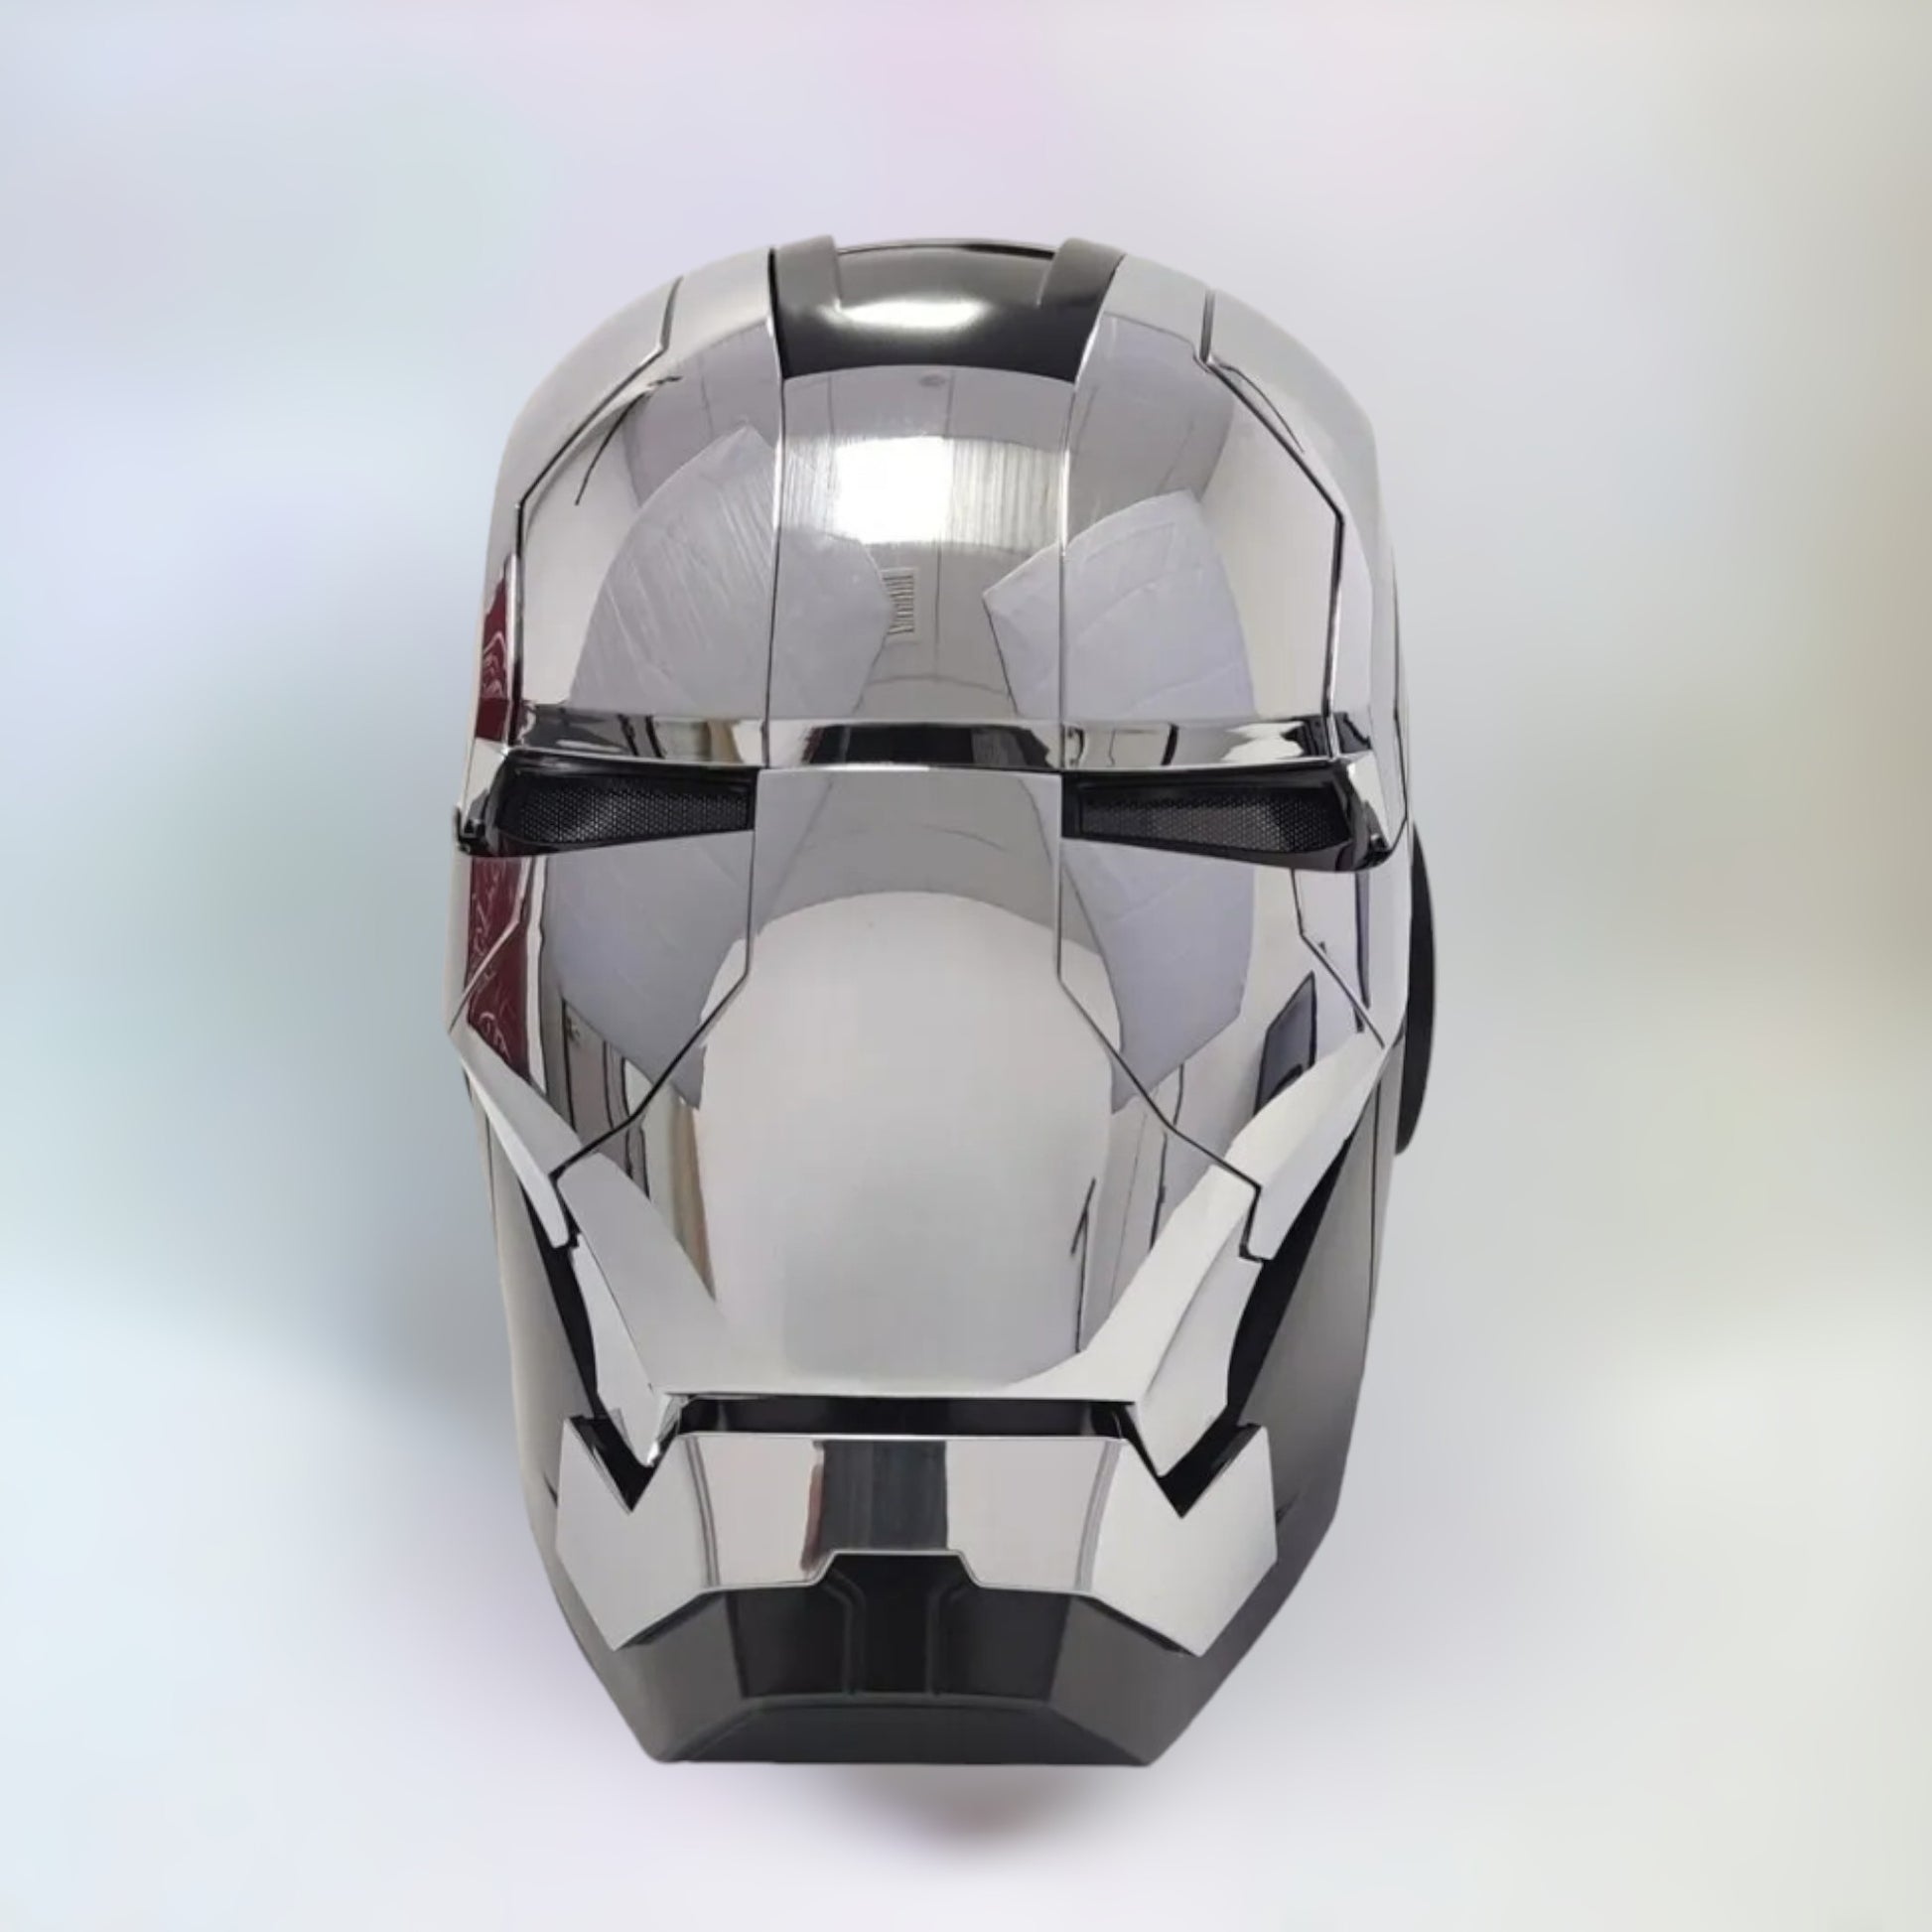 Iron Man Helmet MK5 Black War Machine Edition With Jarvis Voice Activation front side view on plain white background.